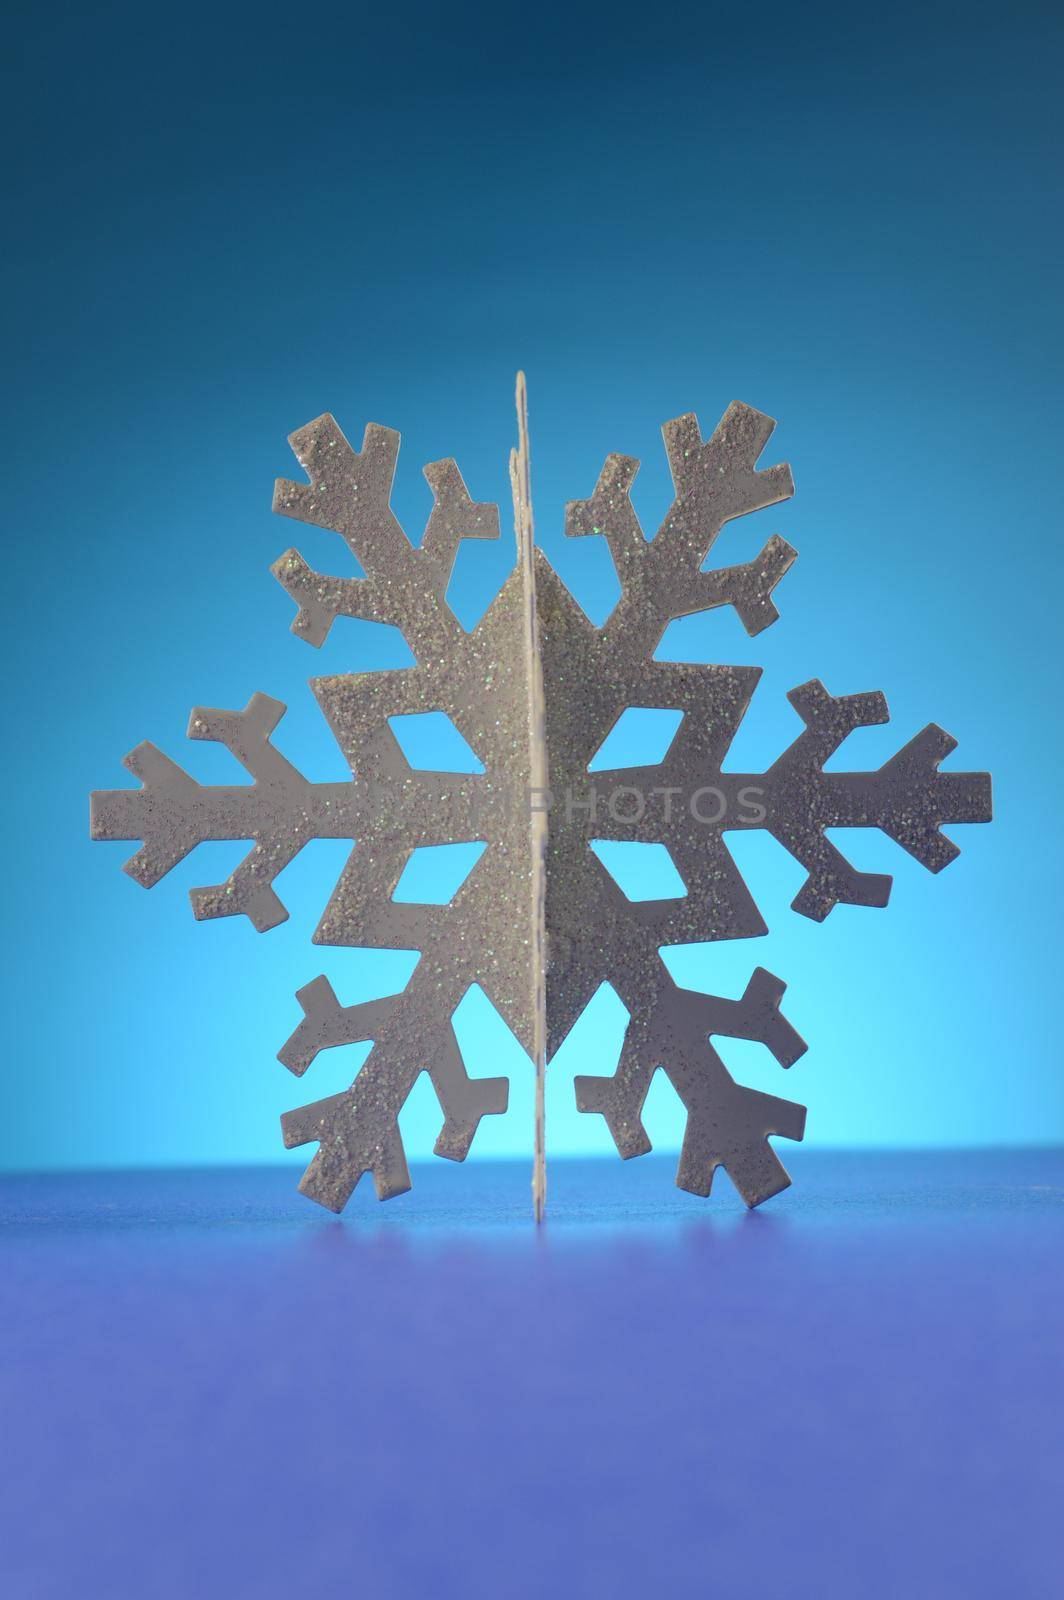 A cool winter snowflake over a blue background.